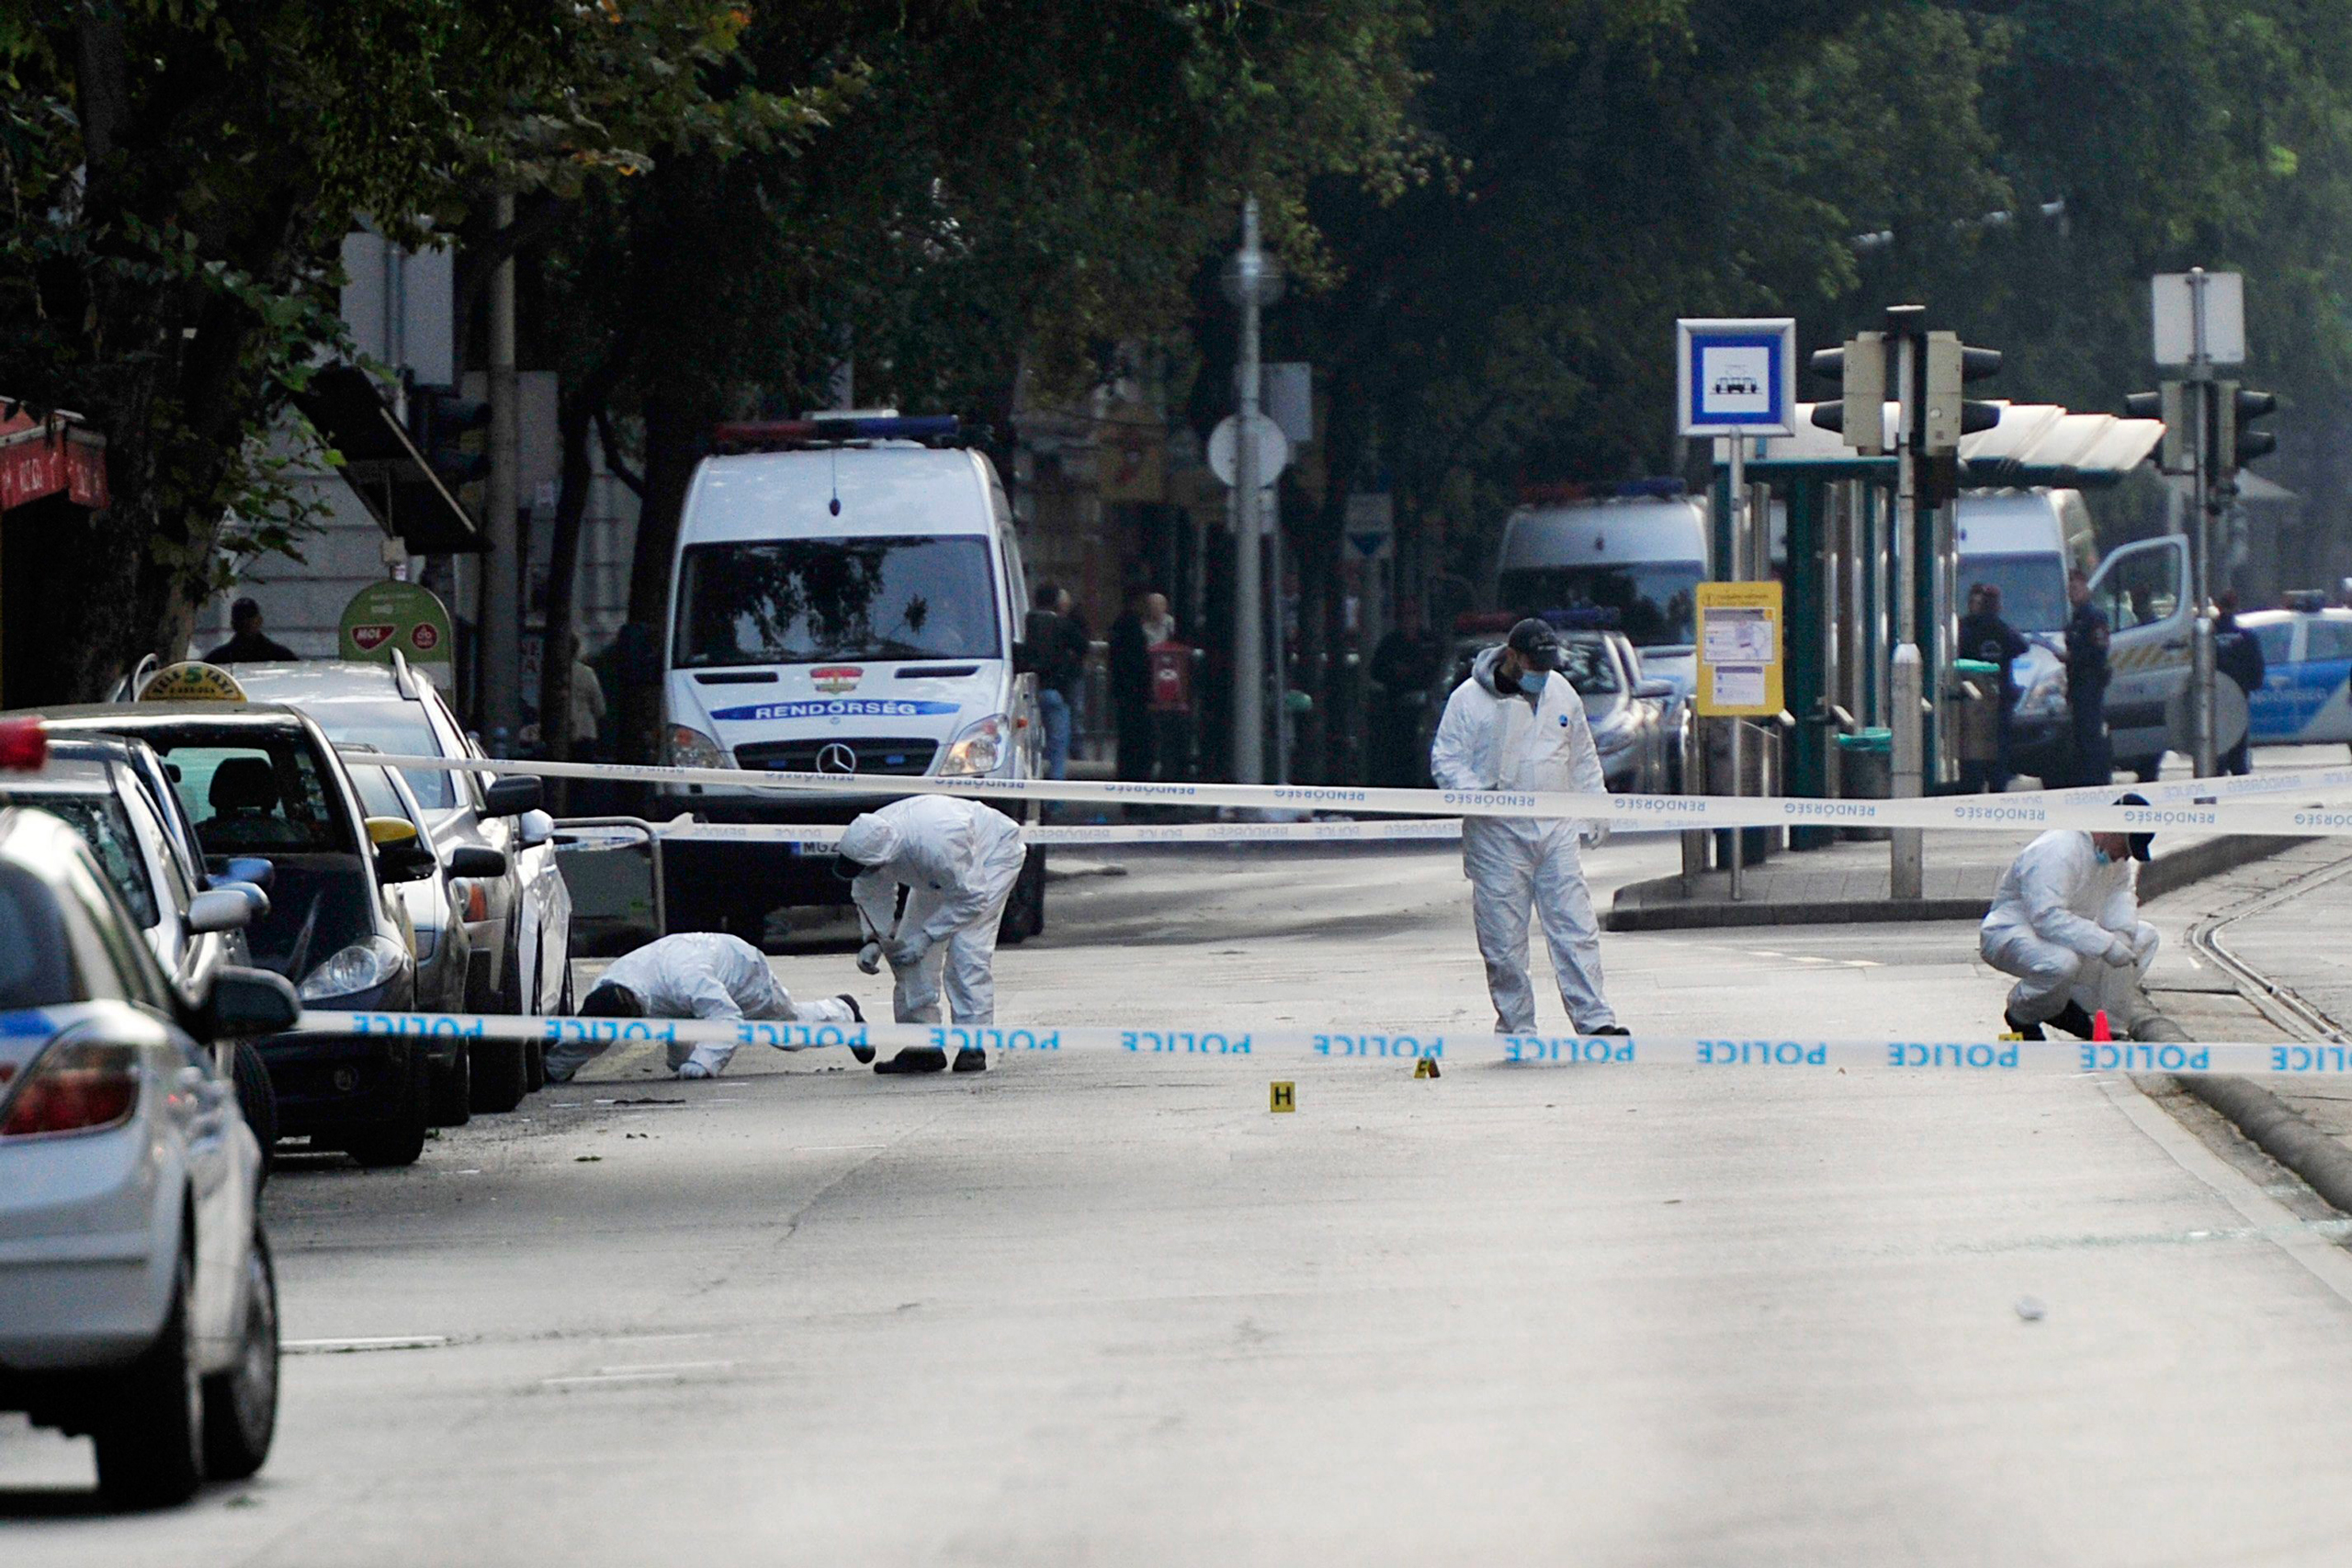 Police forensic experts examine the scene of an explosion that occurred late on Saturday night in central Budapest, Hungary, on Sept. 25, 2016. (Peter Lakatos—MTI/AP)